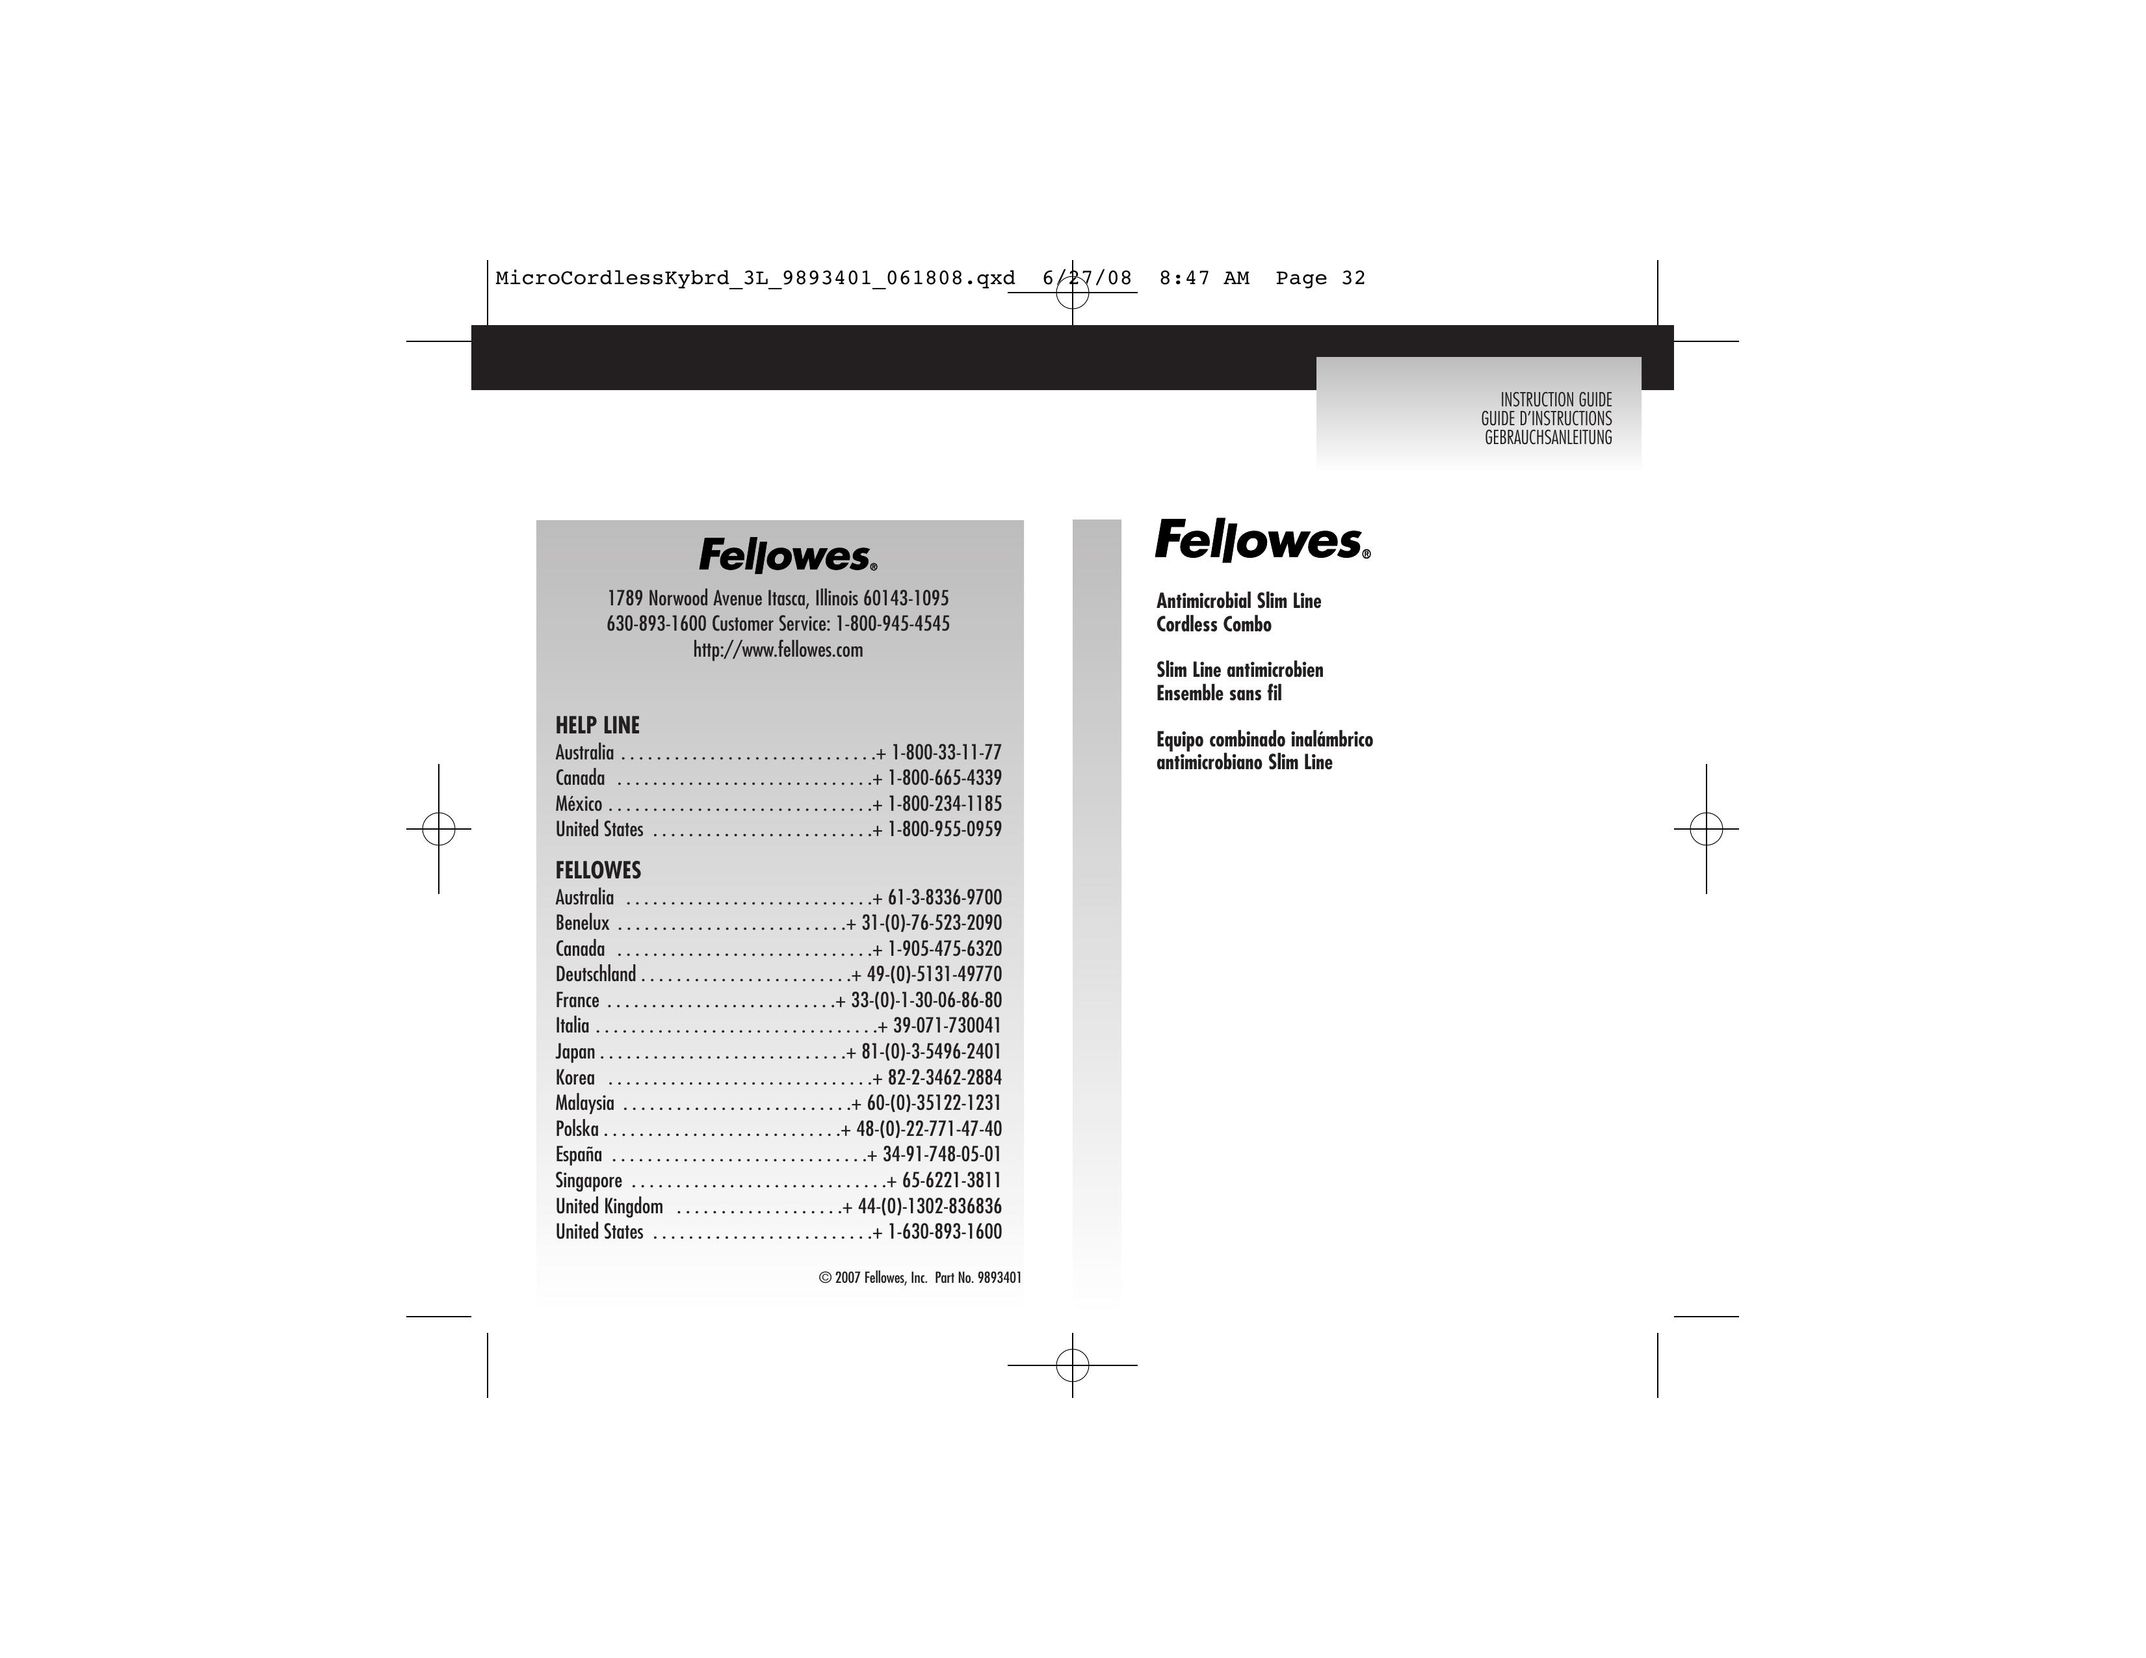 Fellowes 9893401 Mouse User Manual